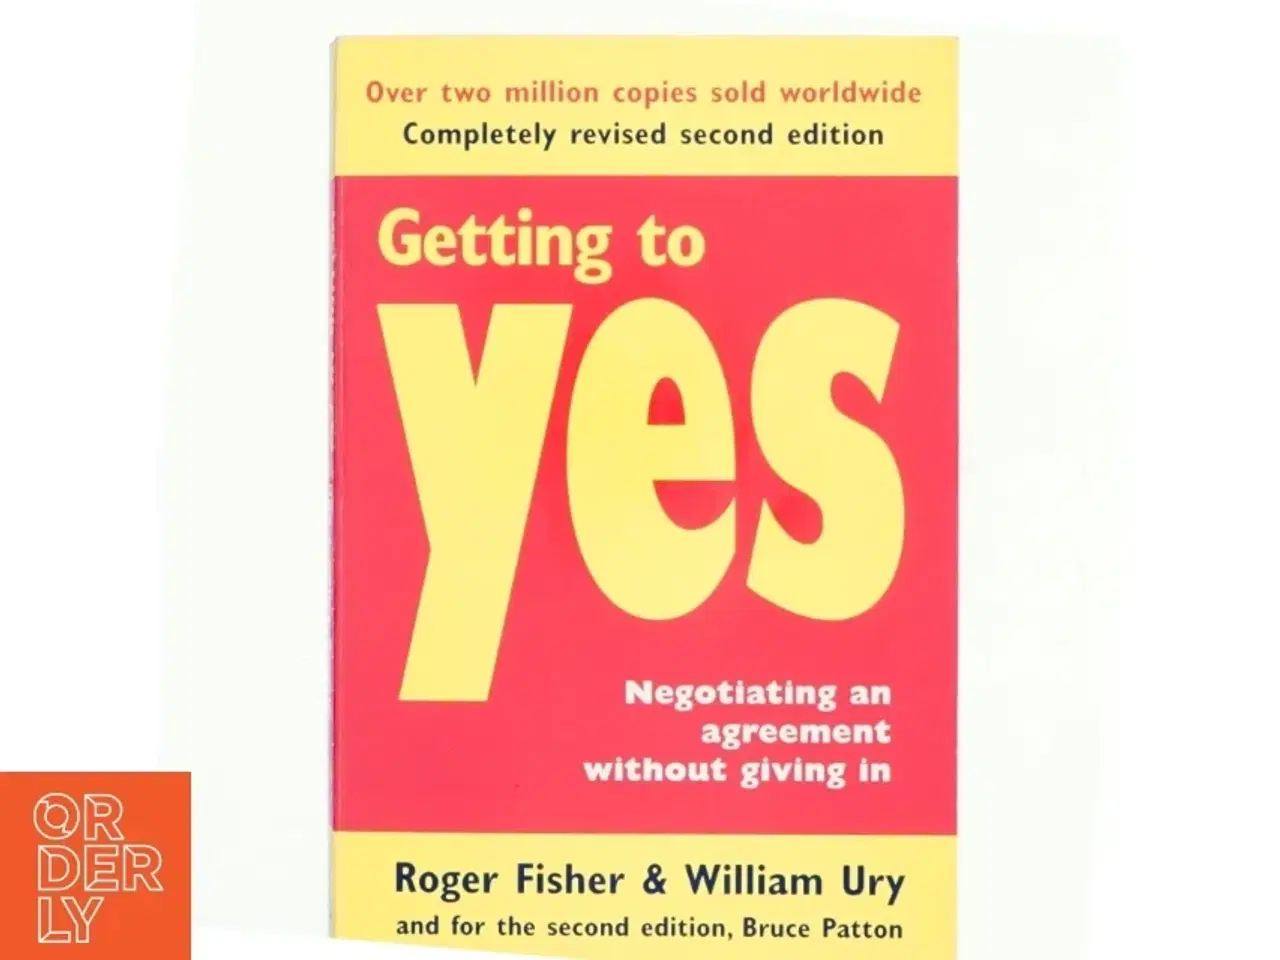 Billede 1 - Getting to yes by Roger Fisher